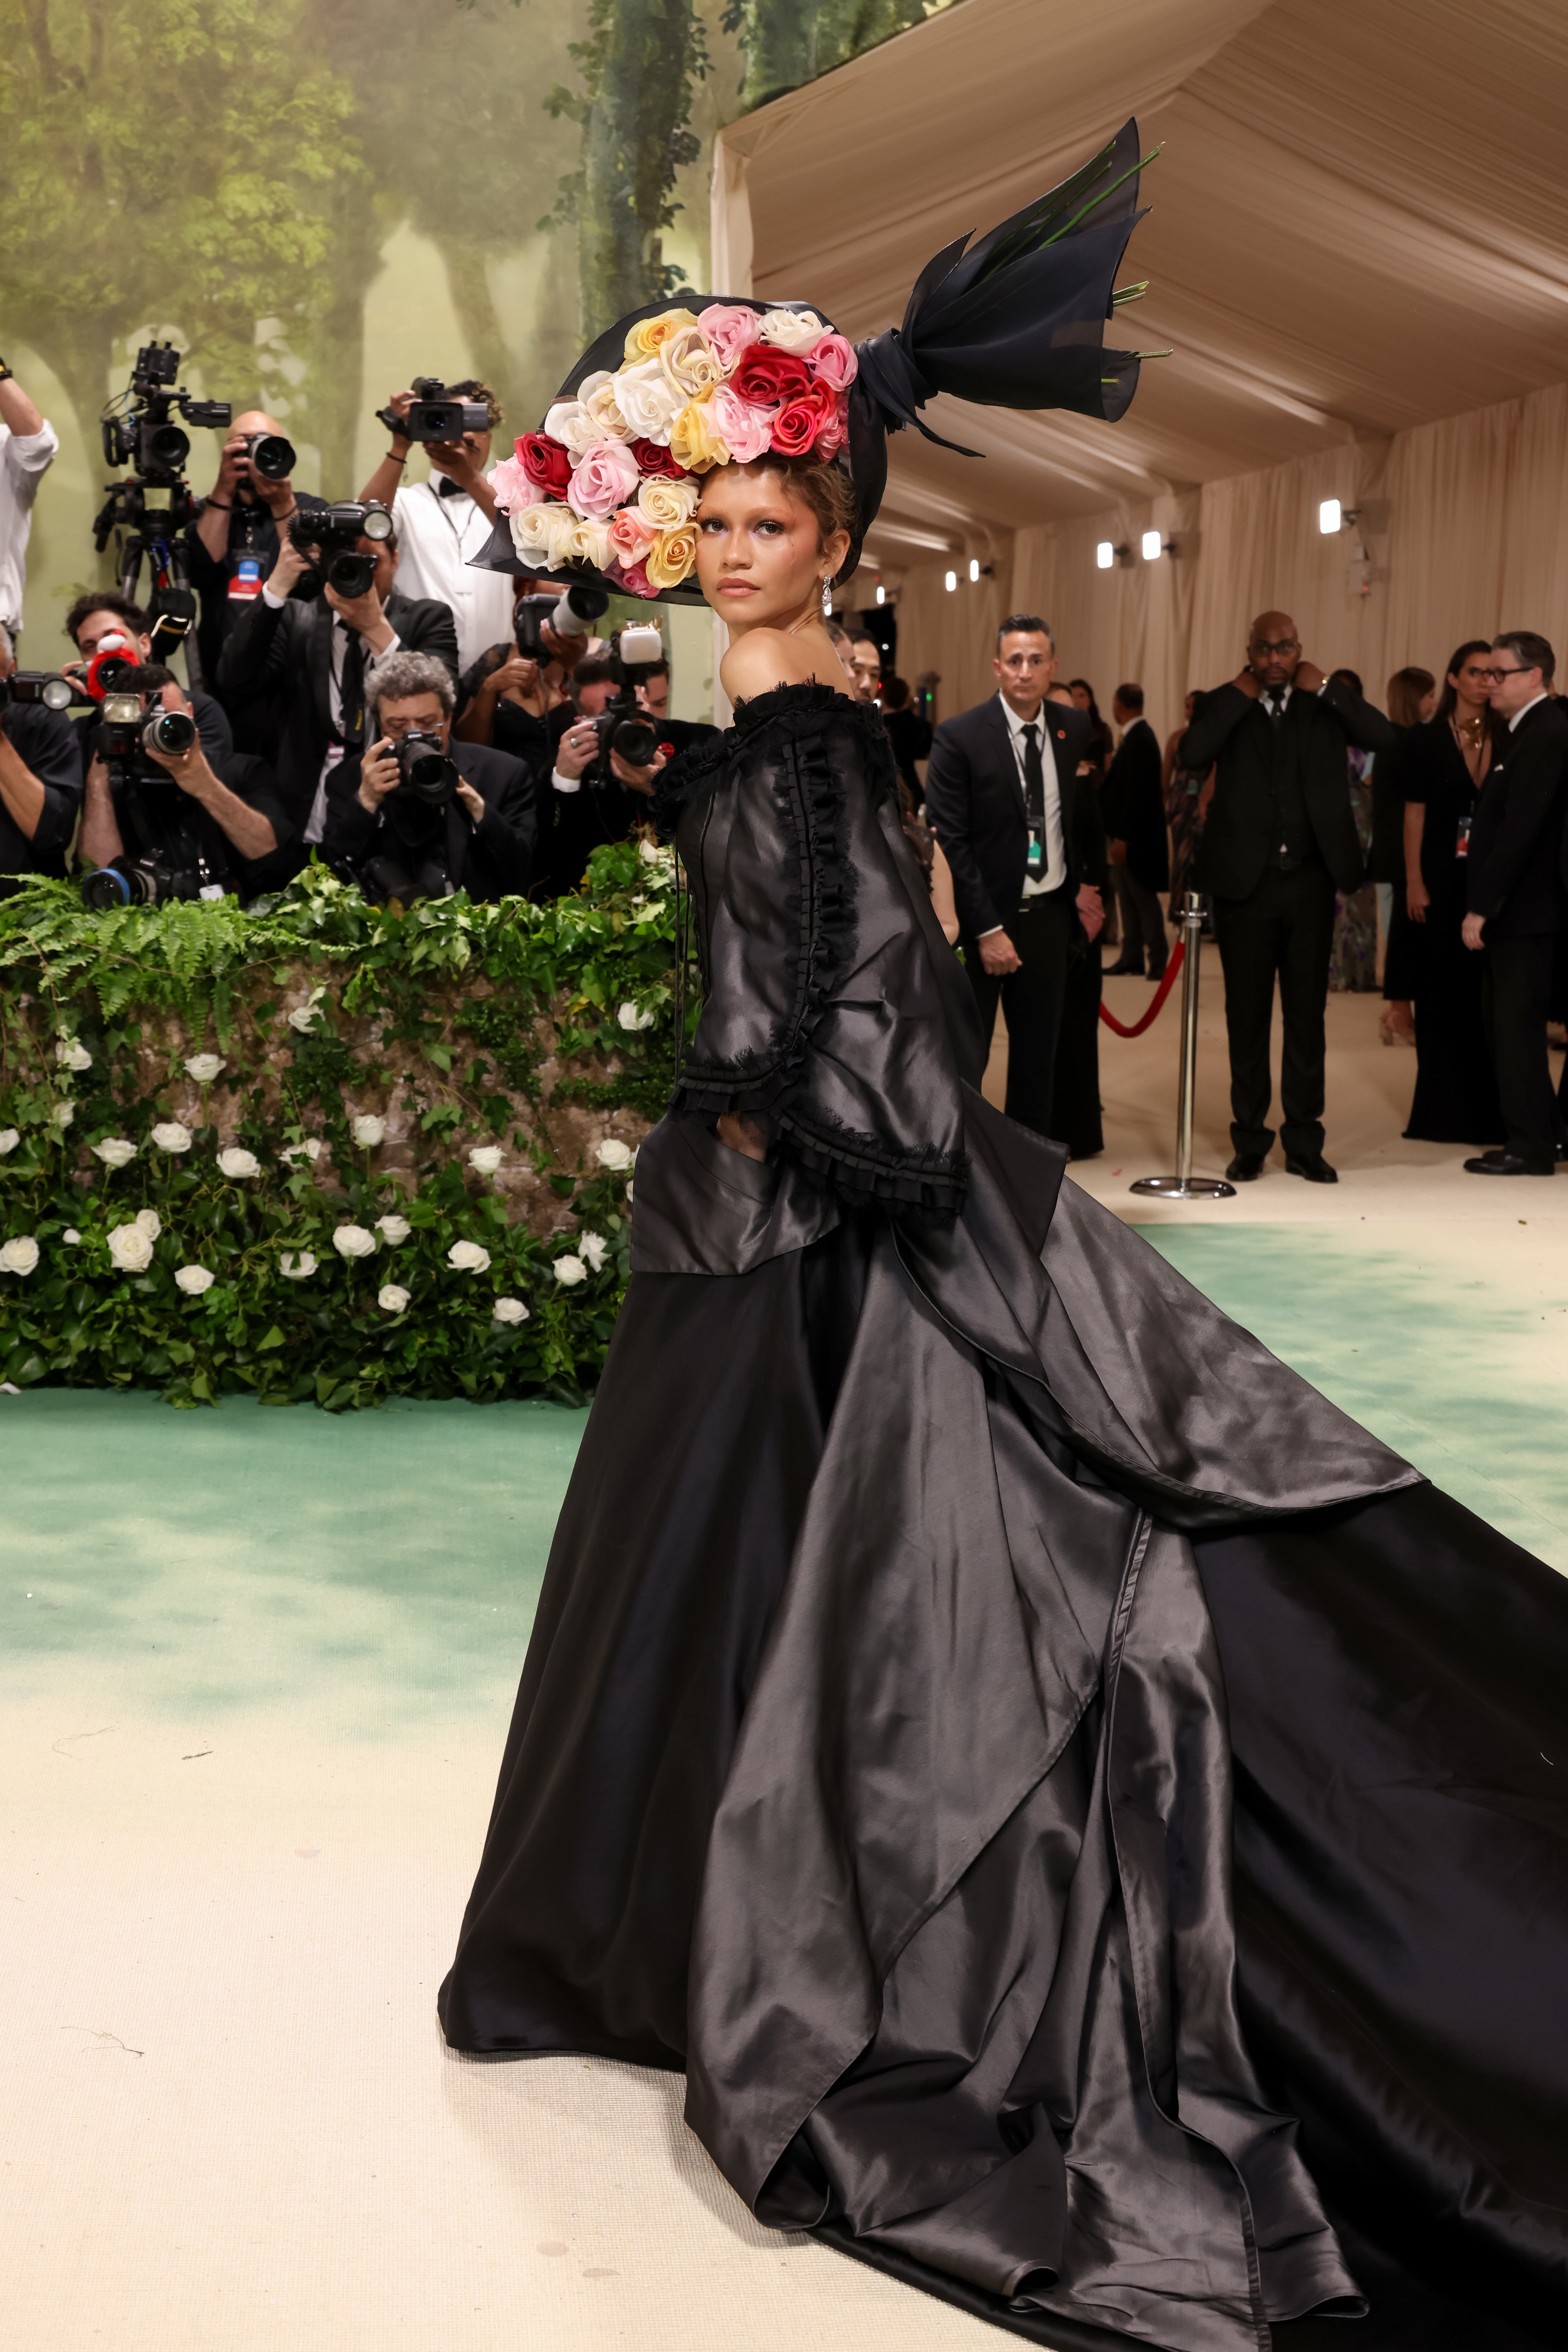 Zendaya in elaborate floral headpiece and black gown at event, photographers in background